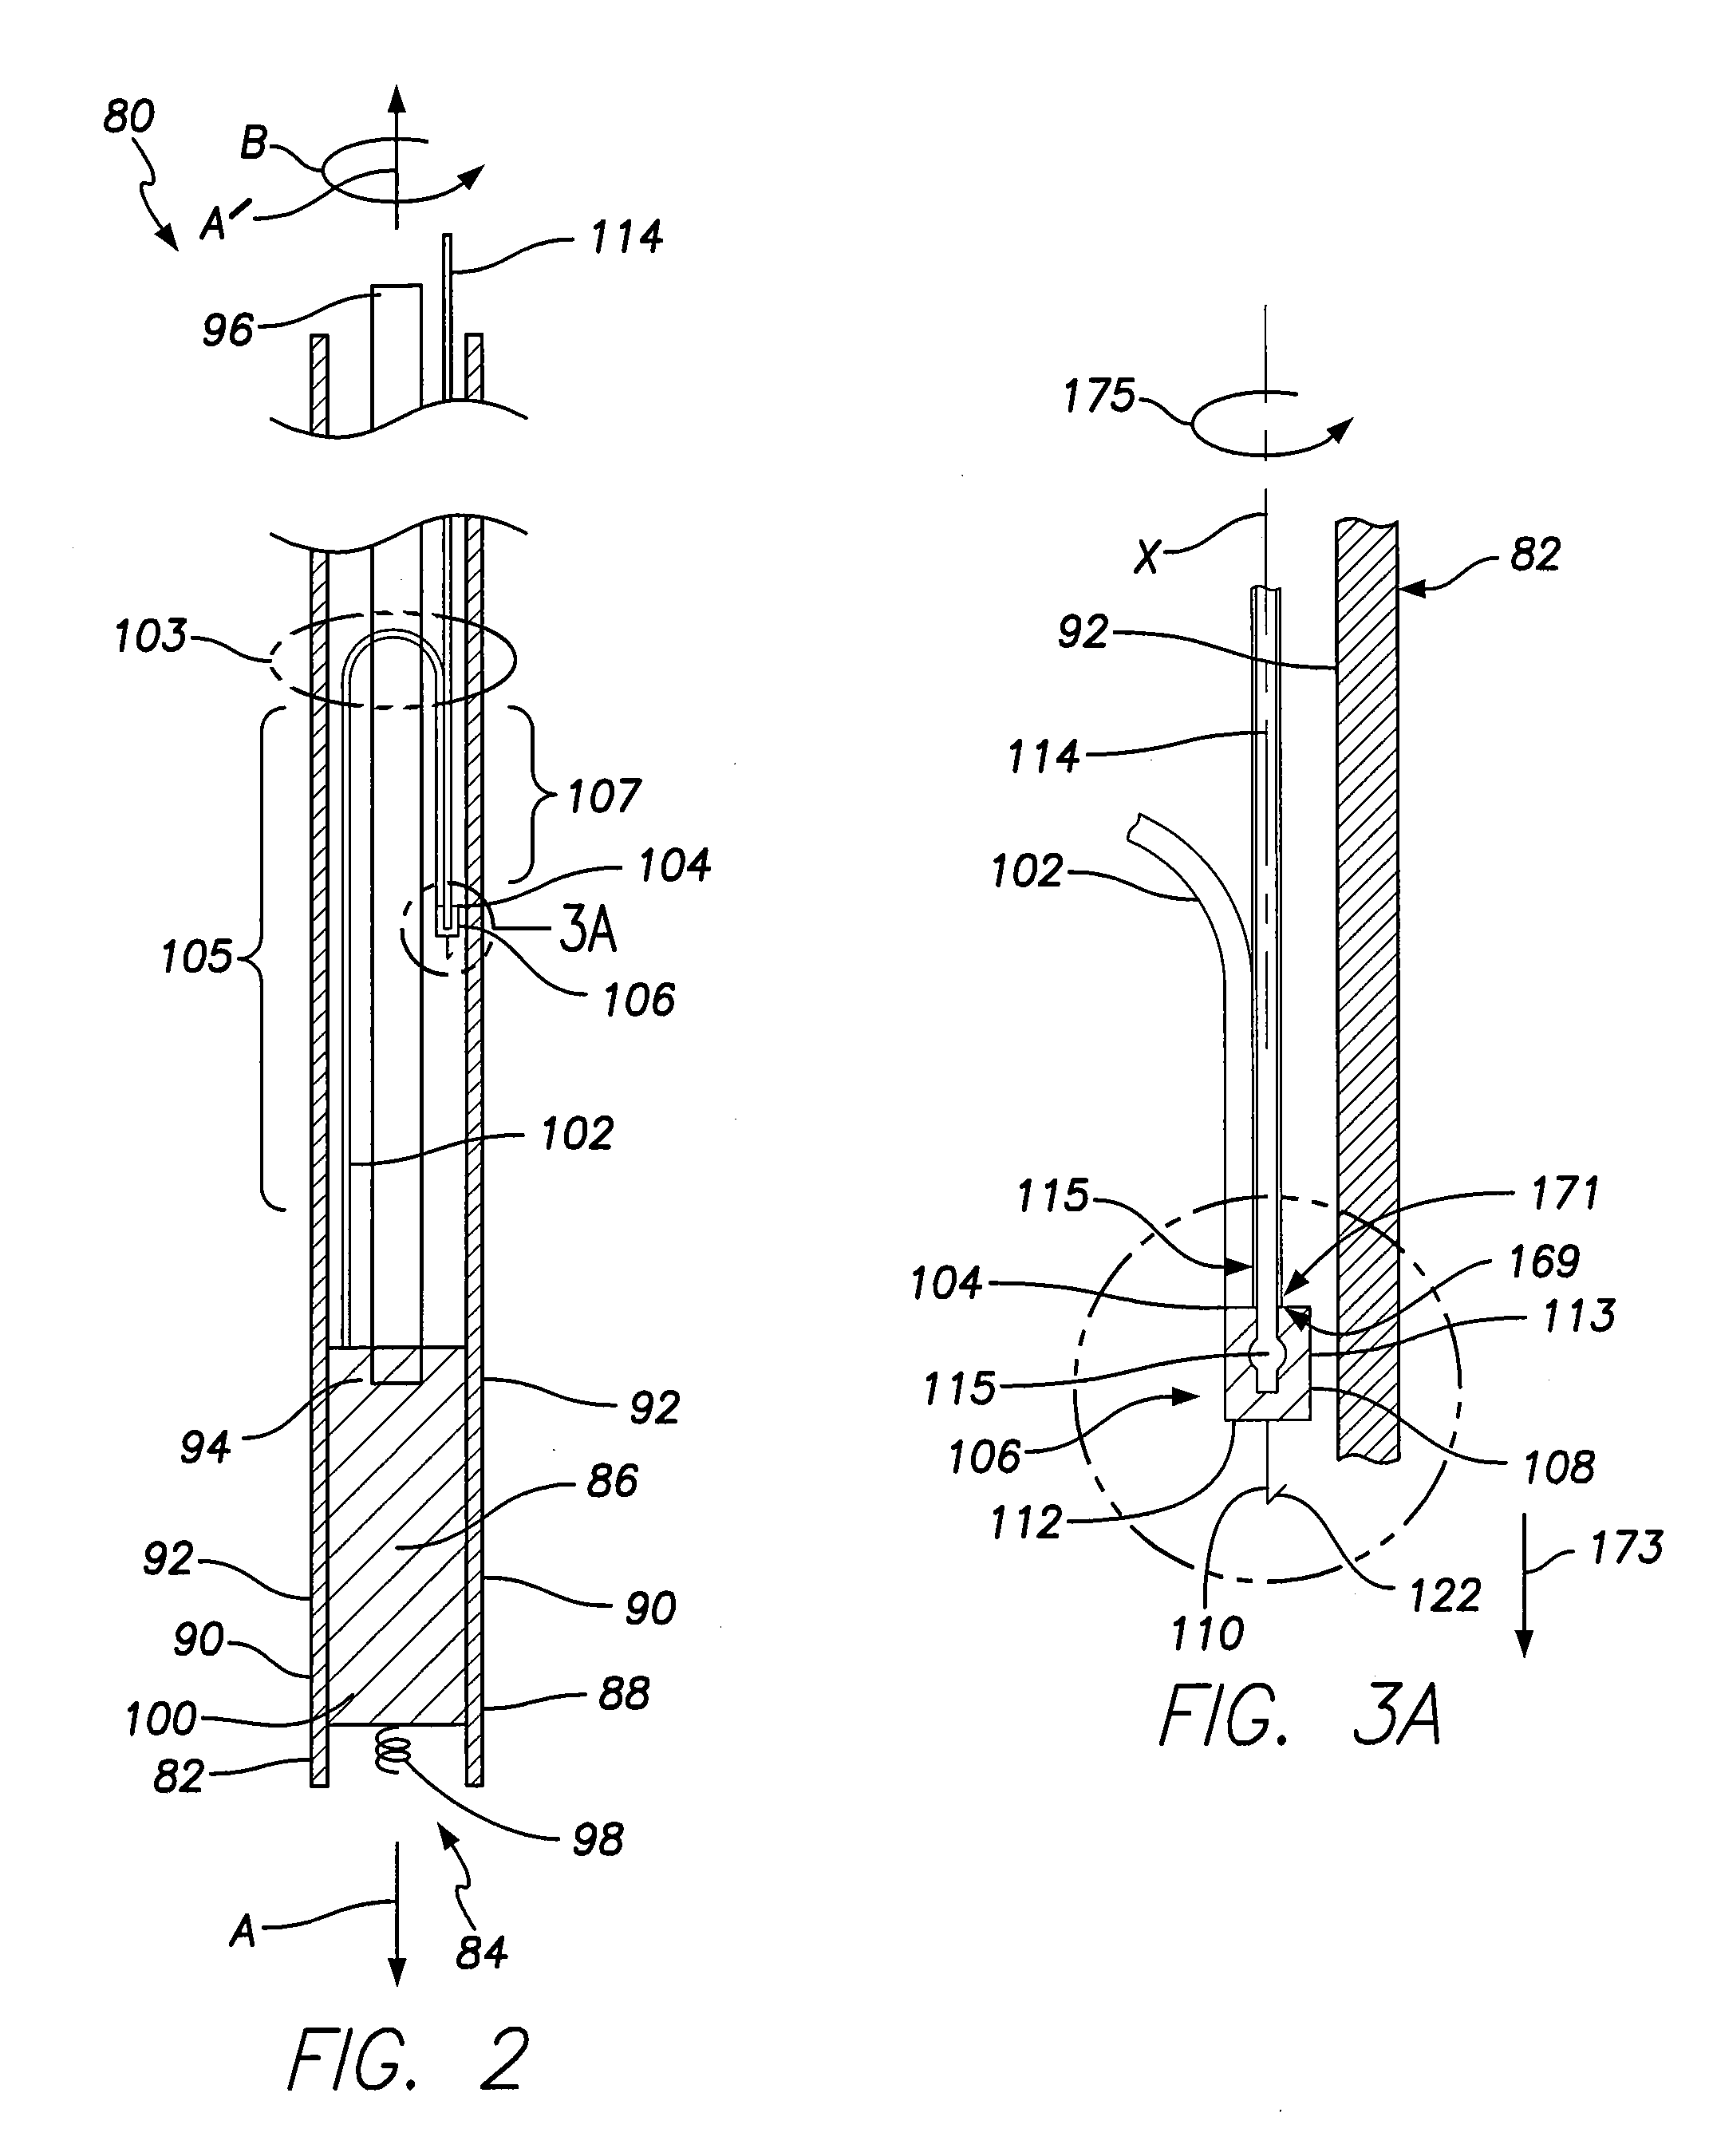 Unitary dual-chamber leadless intra-cardiac medical device and method of implanting same